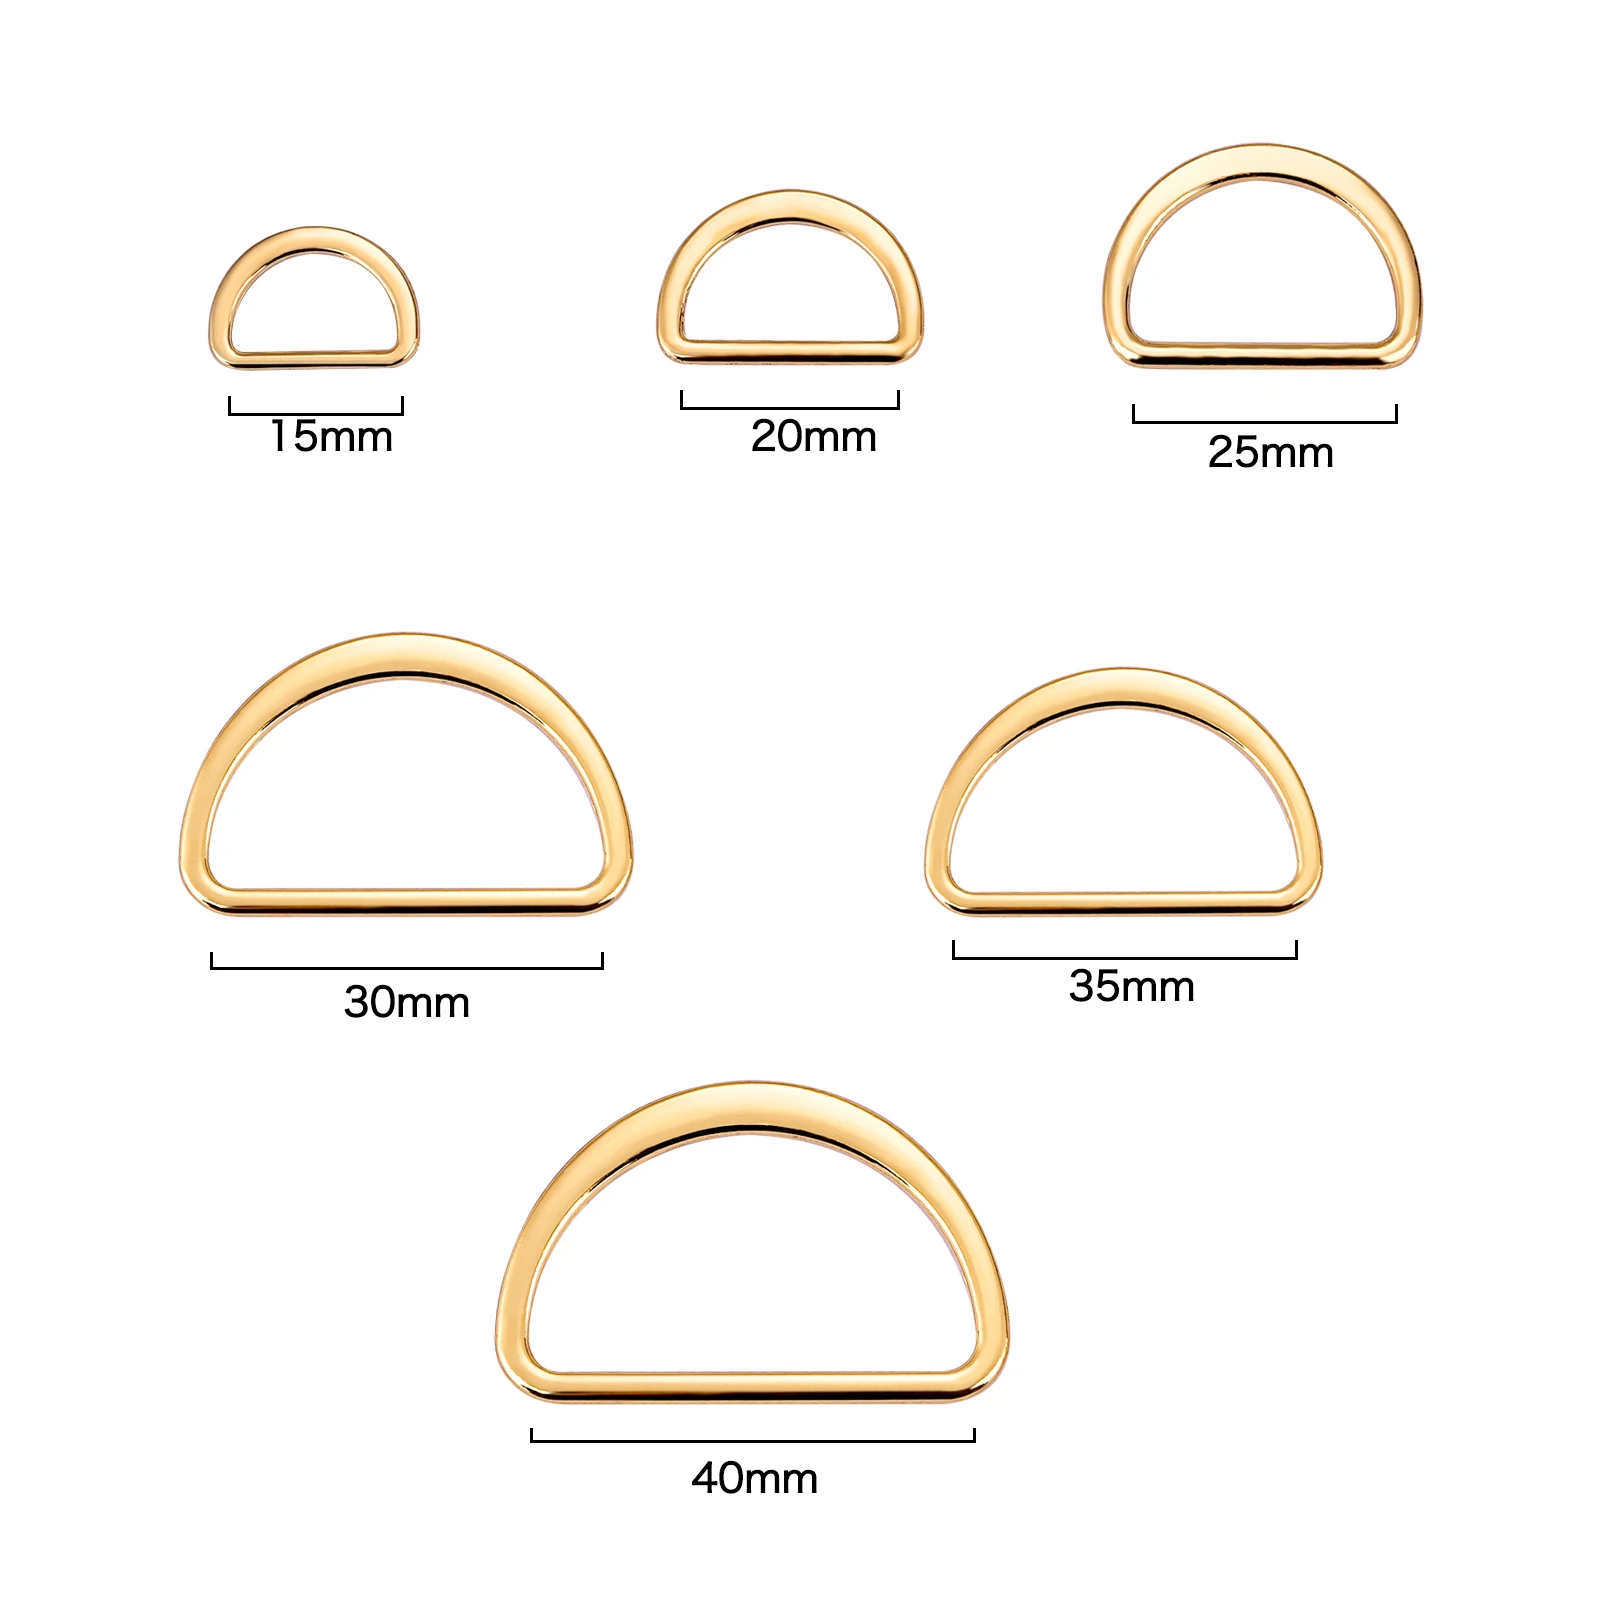 10pcs D Ring Connection D-Shaped Buckle Alloy Metal Silver Gold For Shoes Bags Backpack Buckles DIY Accessory 15/20/25/30/40mm images - 6